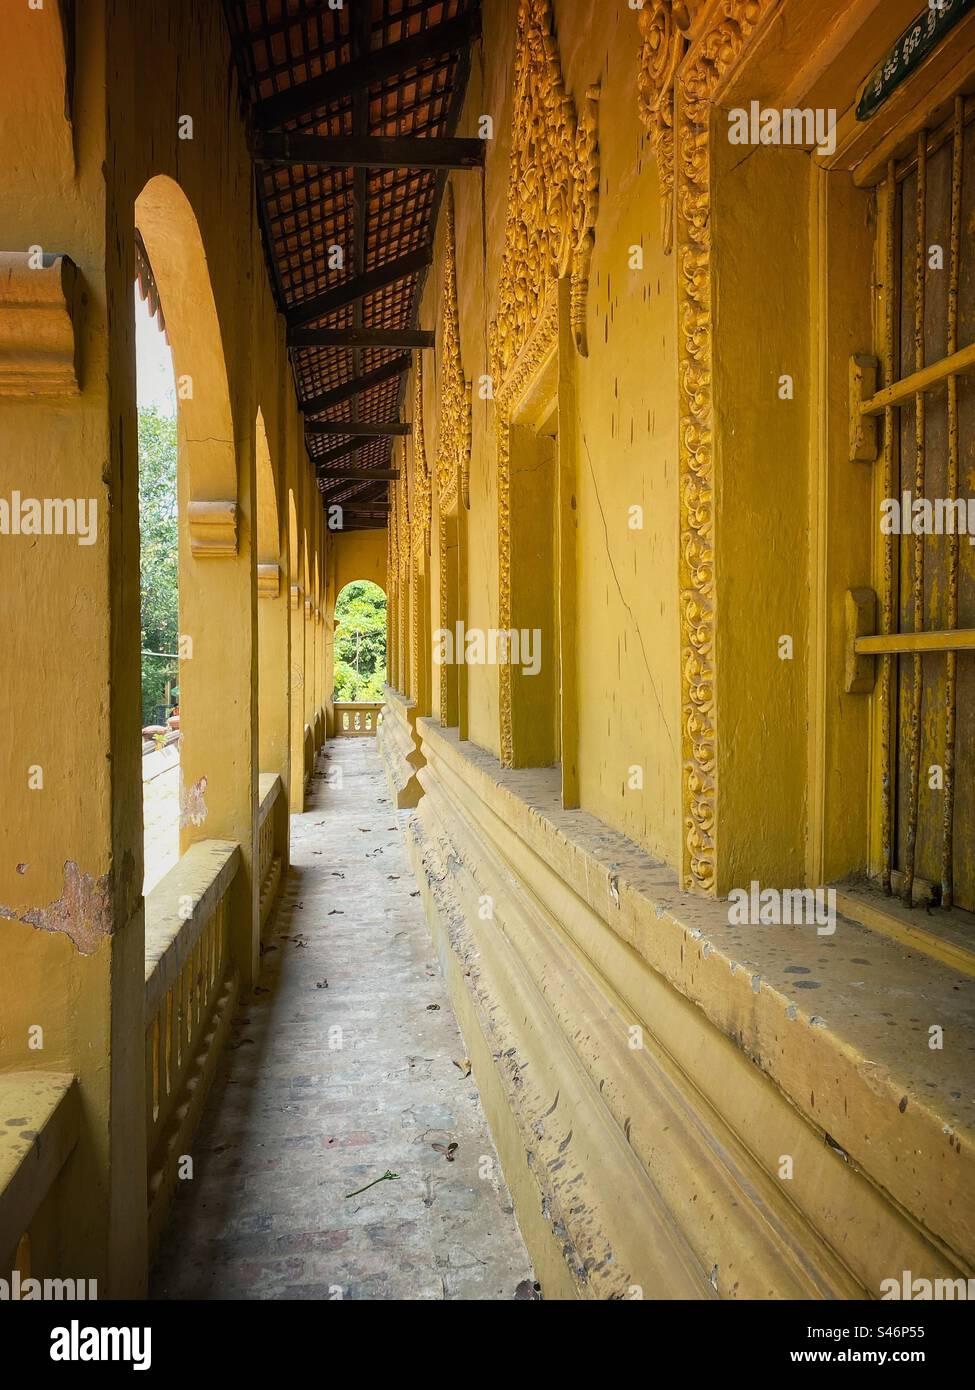 Details of Siem Reap Buddhist temple archway, Cambodia. Stock Photo